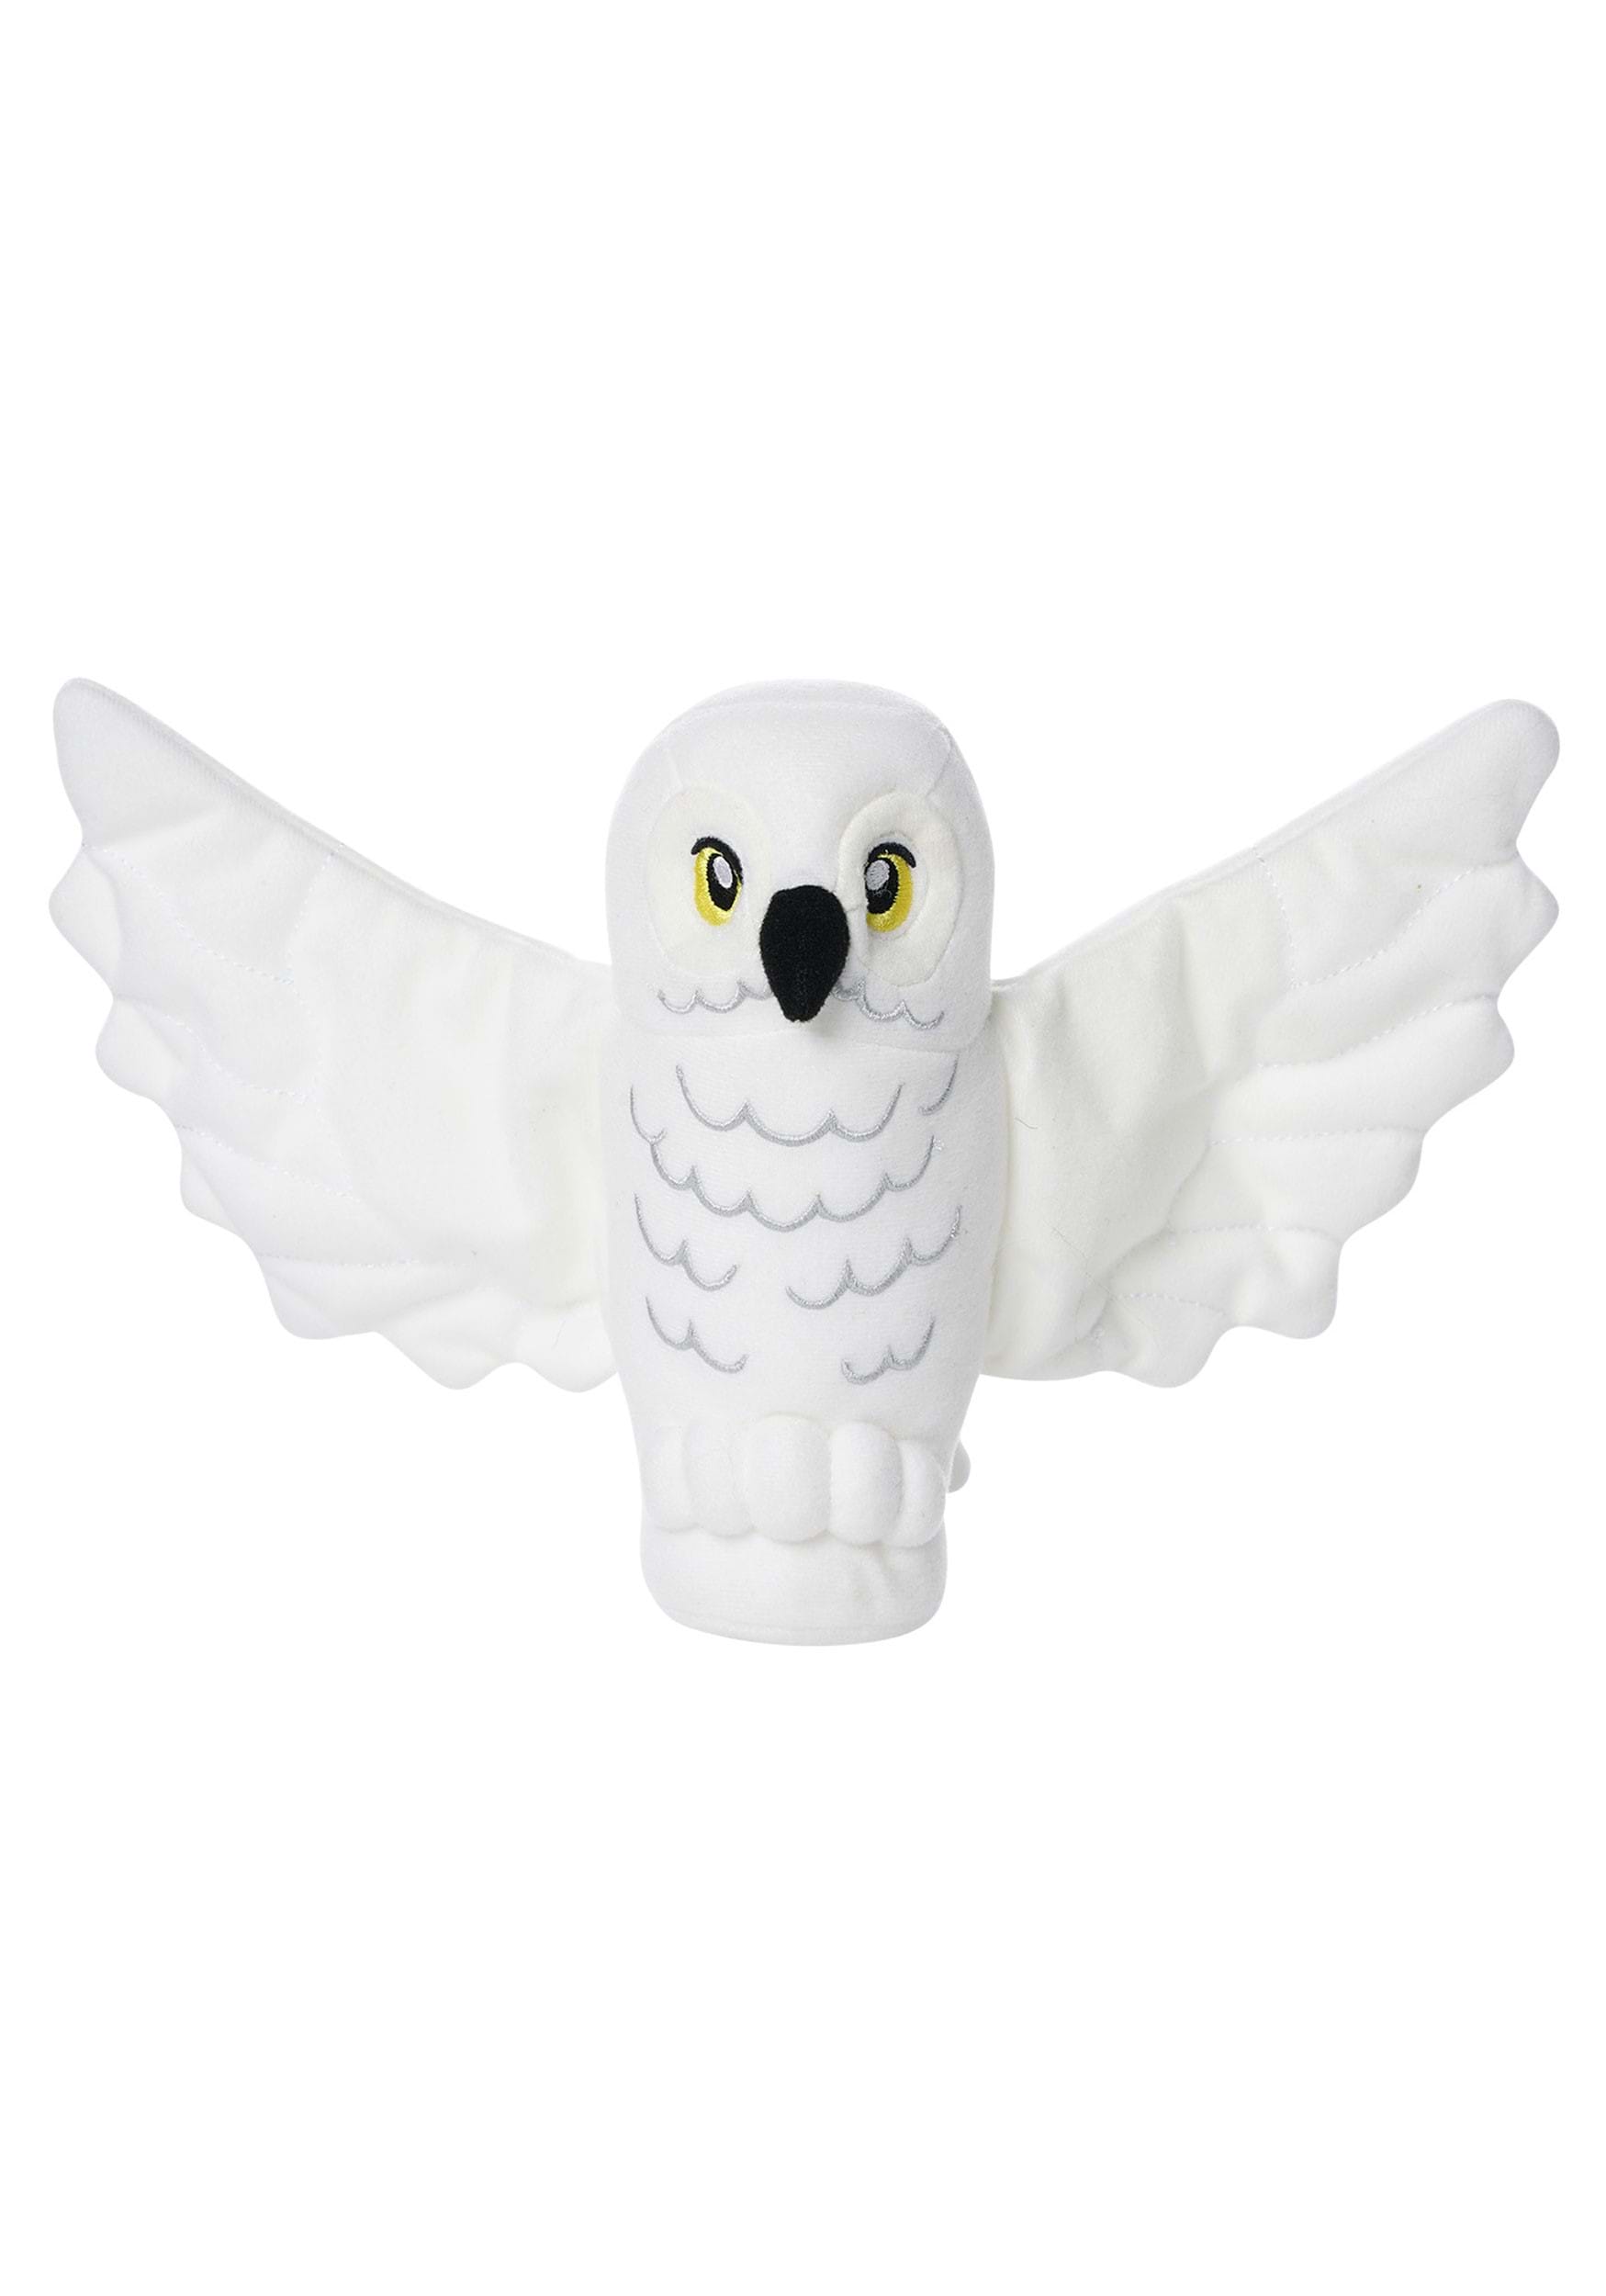 Kid s Harry Potter LEGO Hedwig the Owl Plush